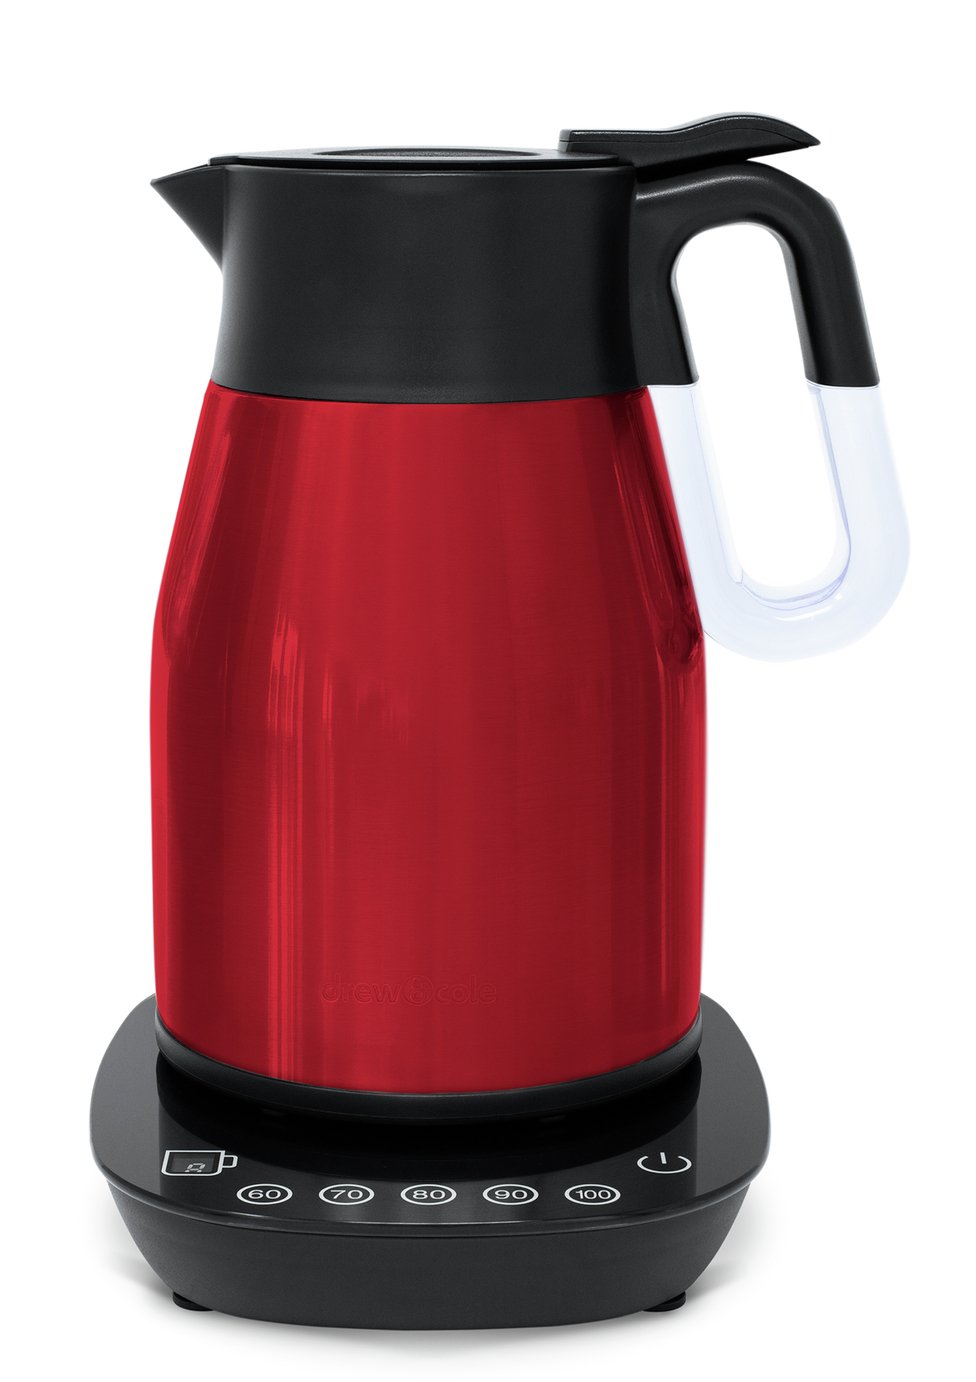 Drew & Cole RediKettle Variable Temperature Kettle - Red